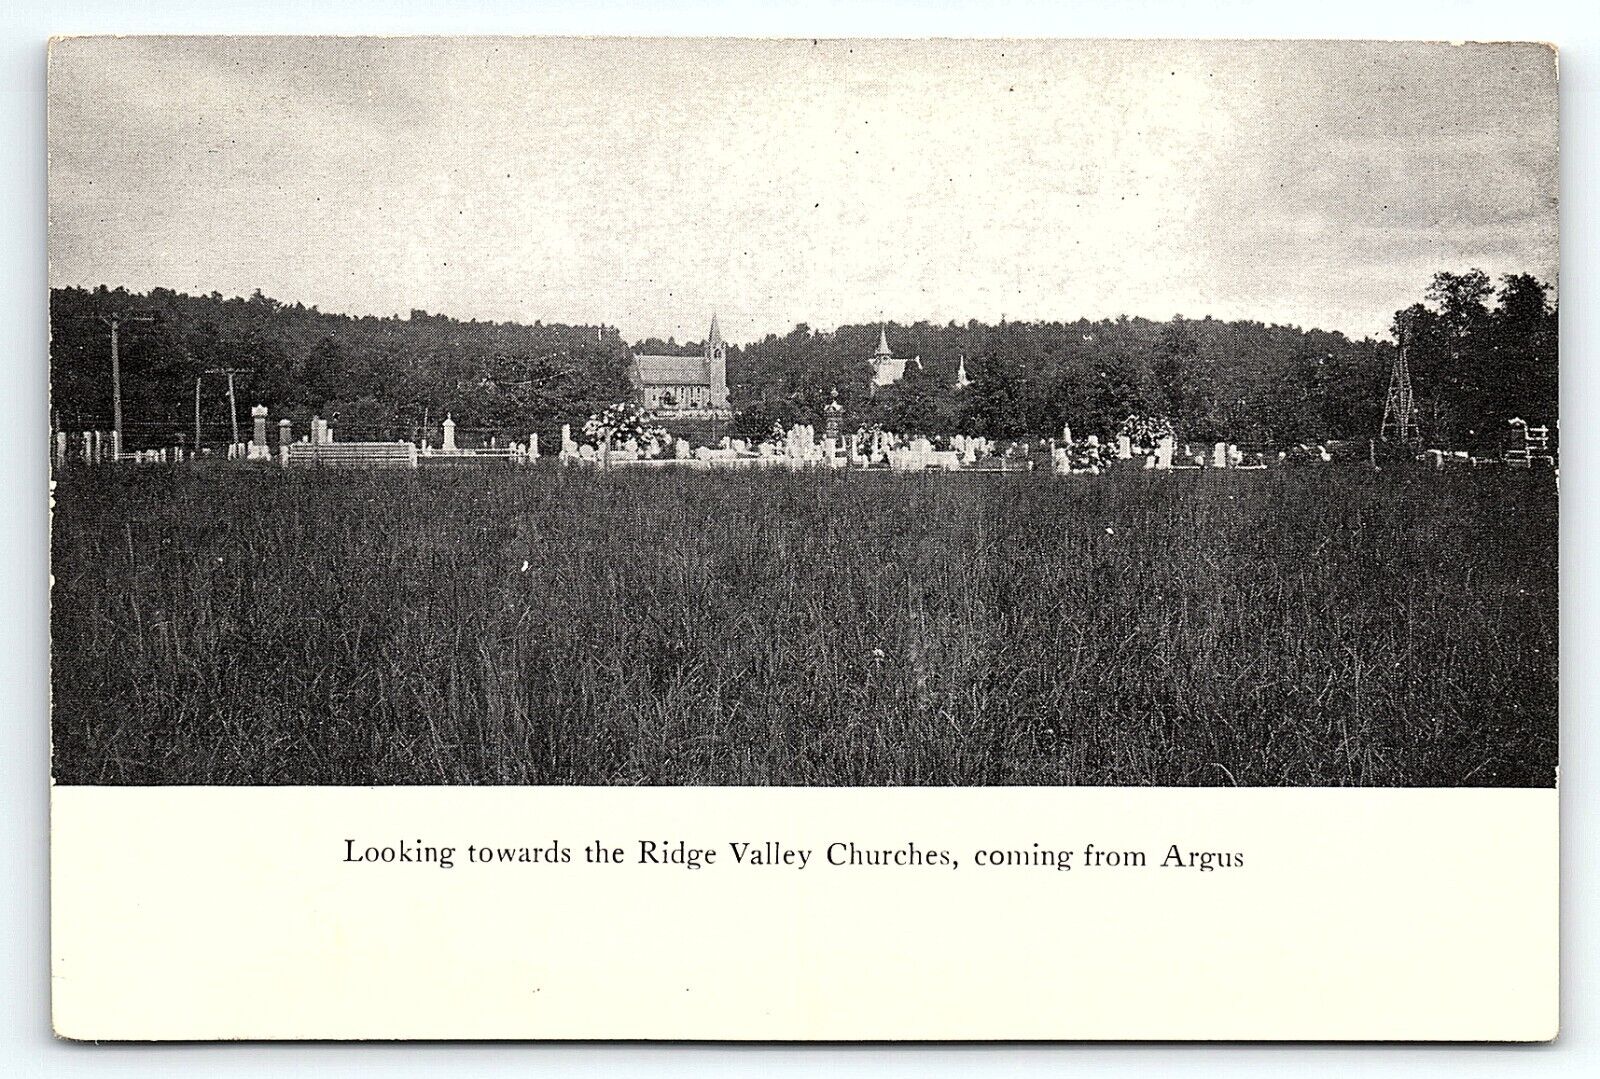 c1910 ARGUS PA LOOKING TOWARDS THE RIDGE VALLEY CHURCHES EARLY POSTCARD P4137